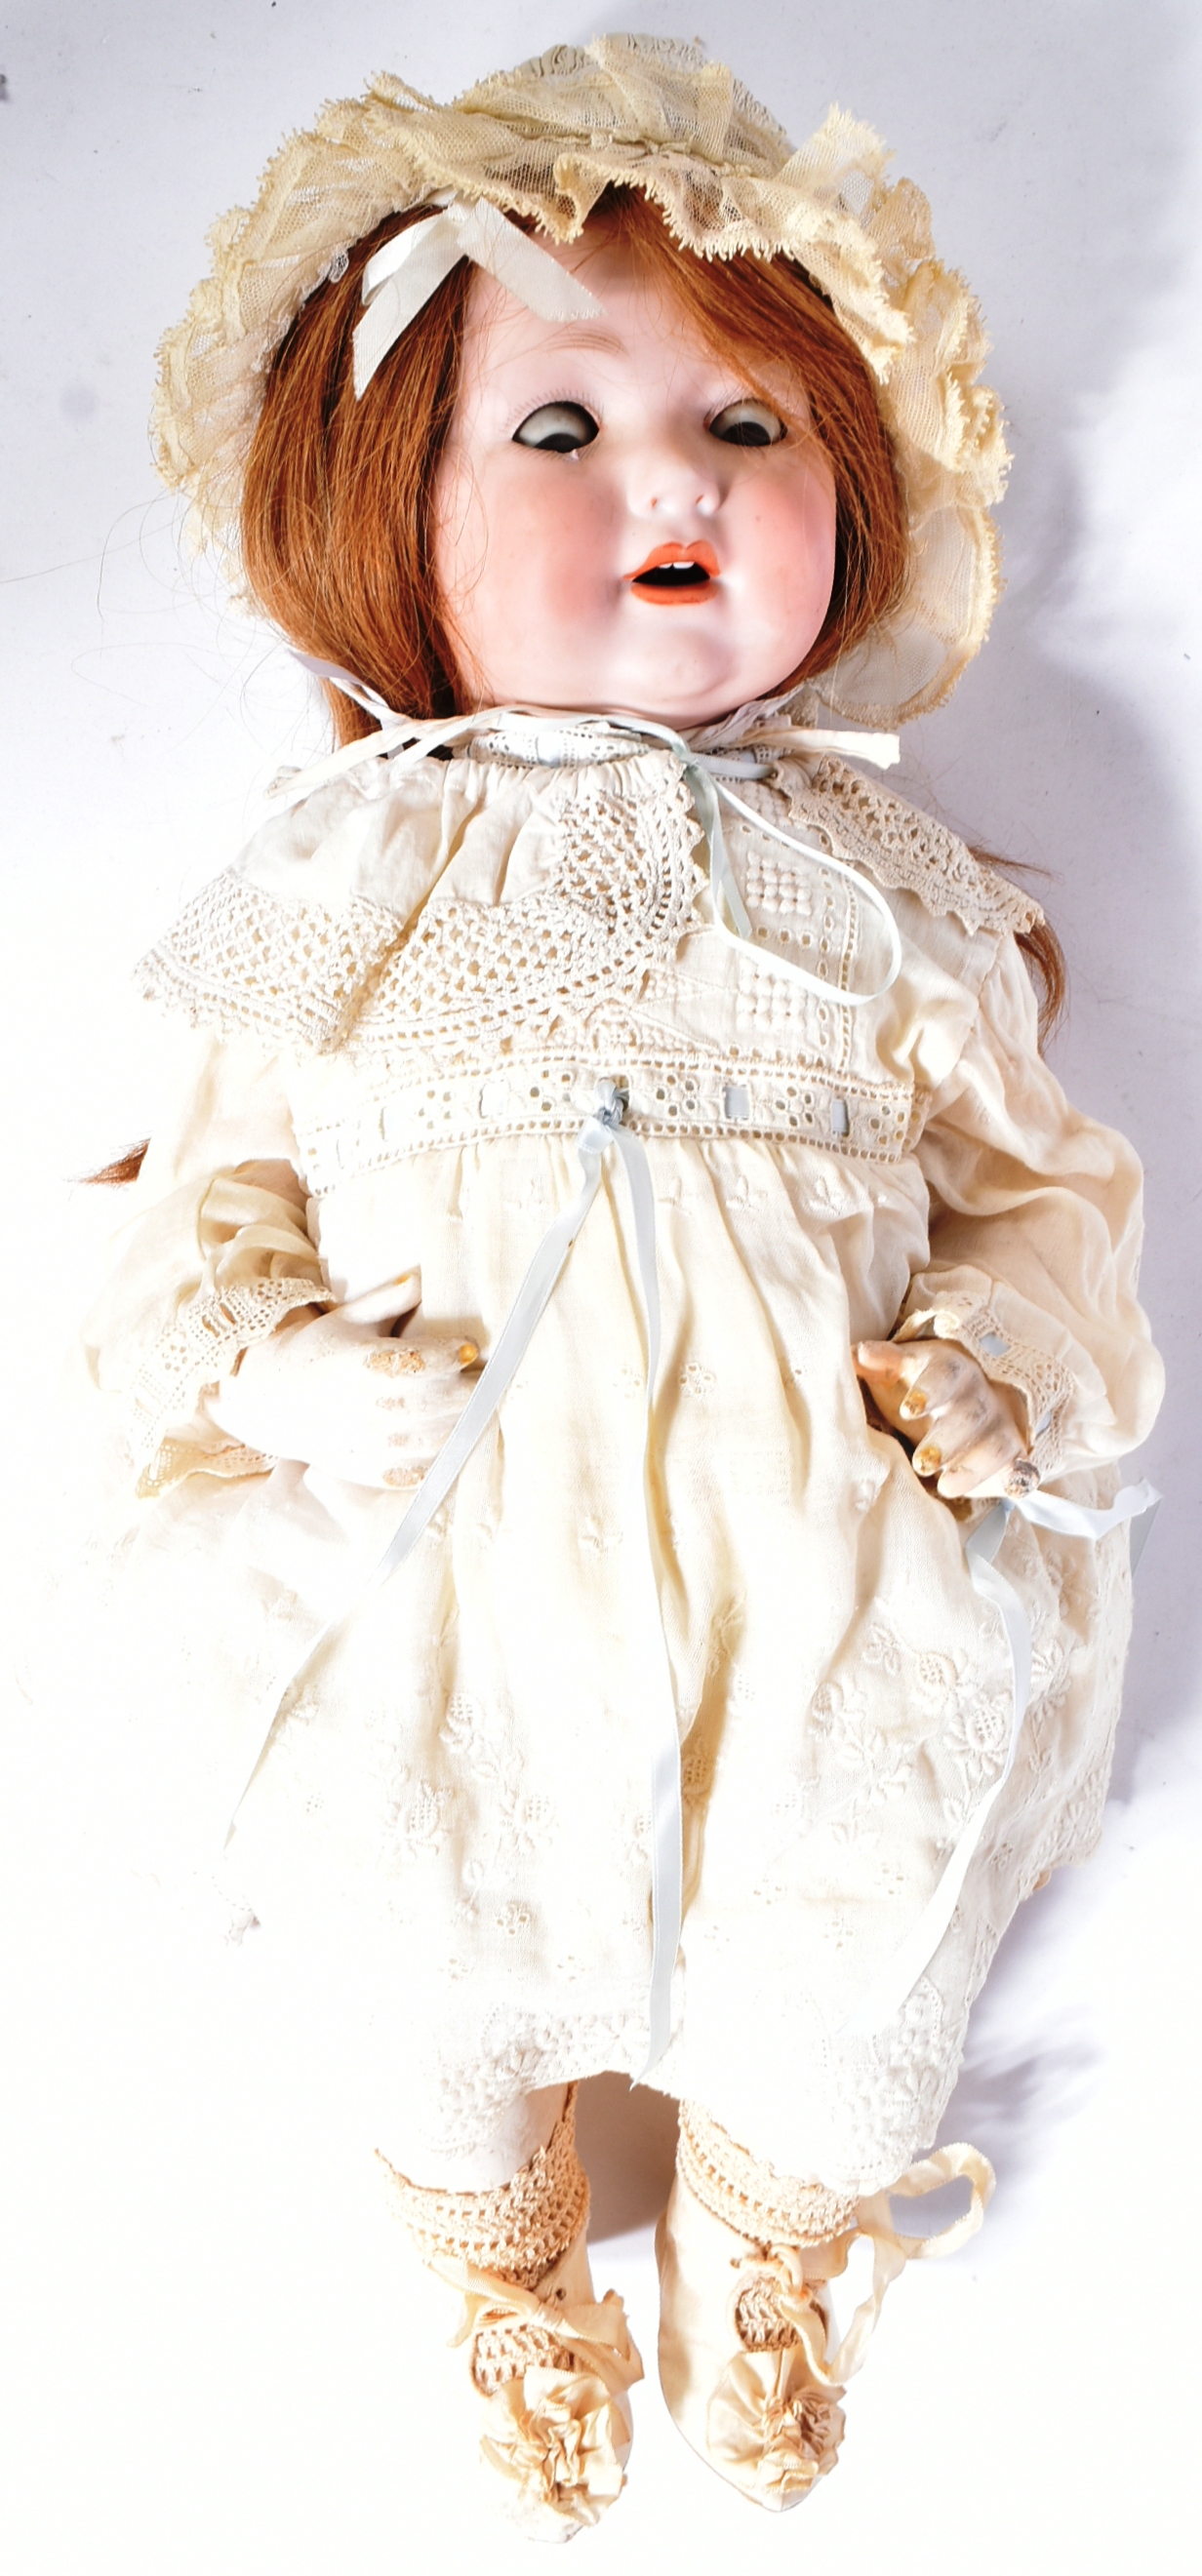 EARLY 20TH CENTURY GERMAN BISQUE HEADED DOLL - Image 5 of 6